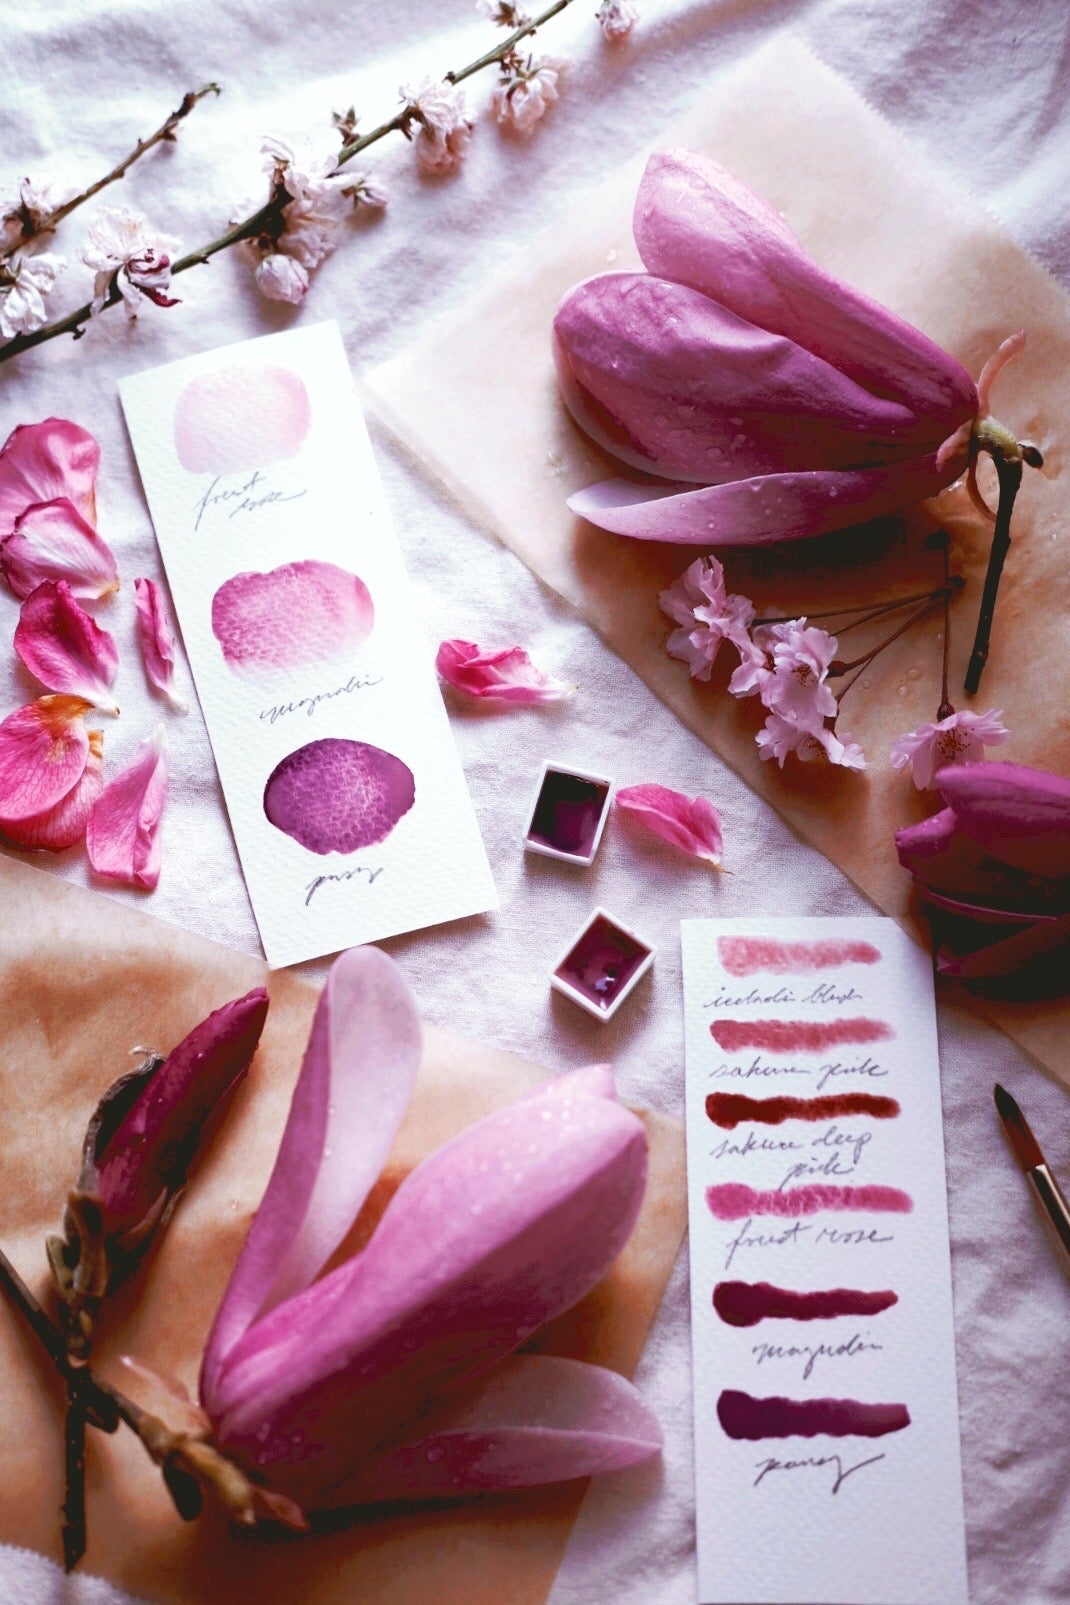 RESERVE for Debi + Pink Blossom + Voyager ii. Limited edition gemstone watercolor palette